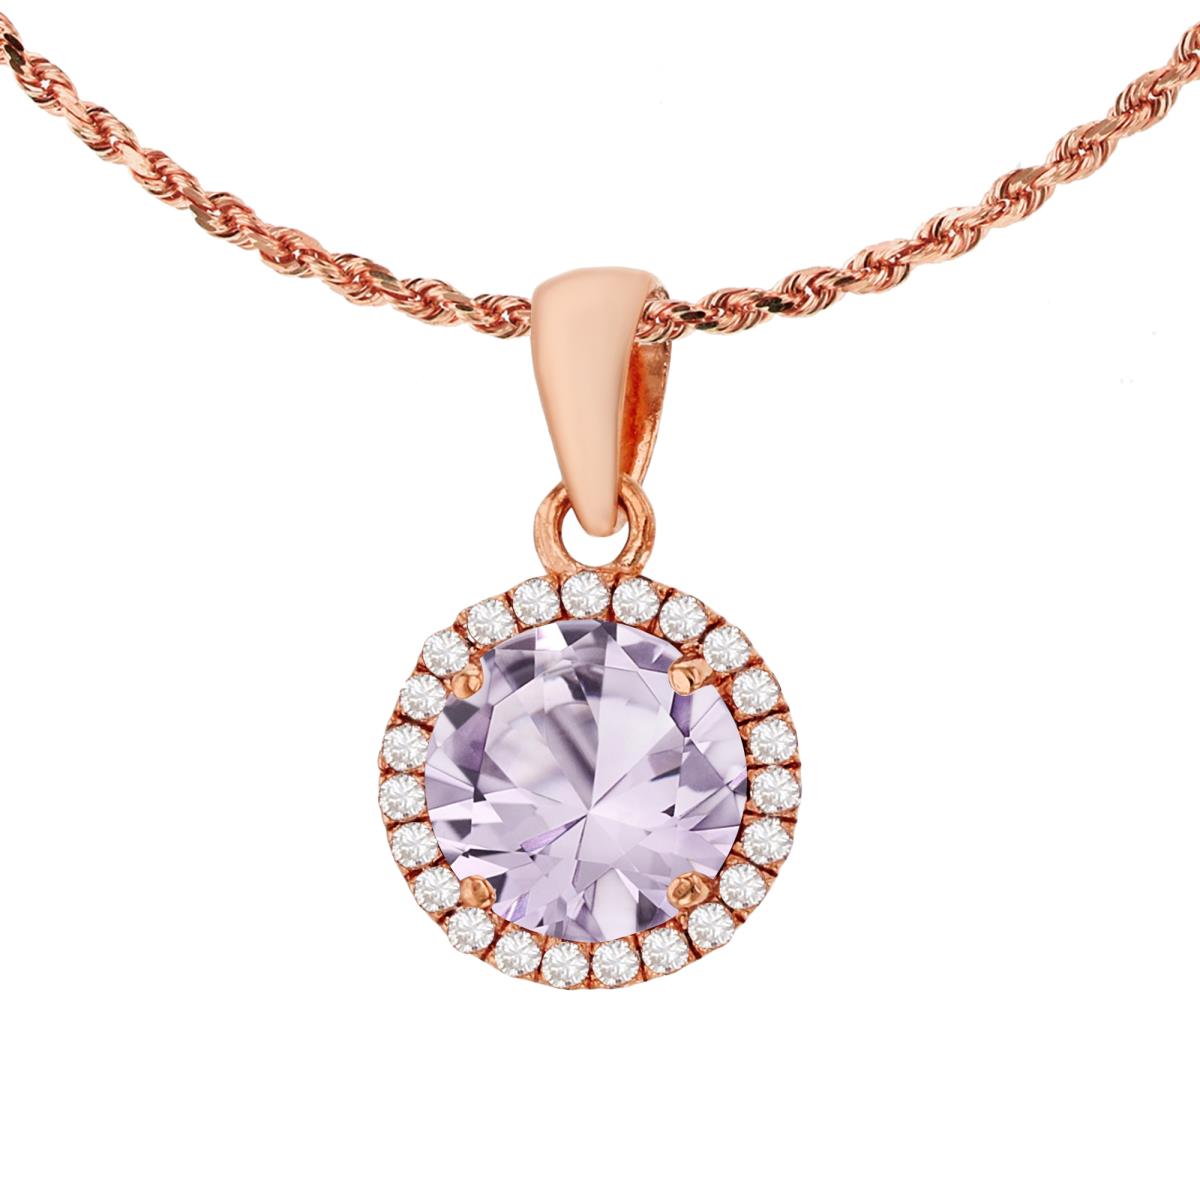 14K Rose Gold 7mm Round Rose De France & 0.12 CTTW Diamond Halo 18" Rope Chain Necklace